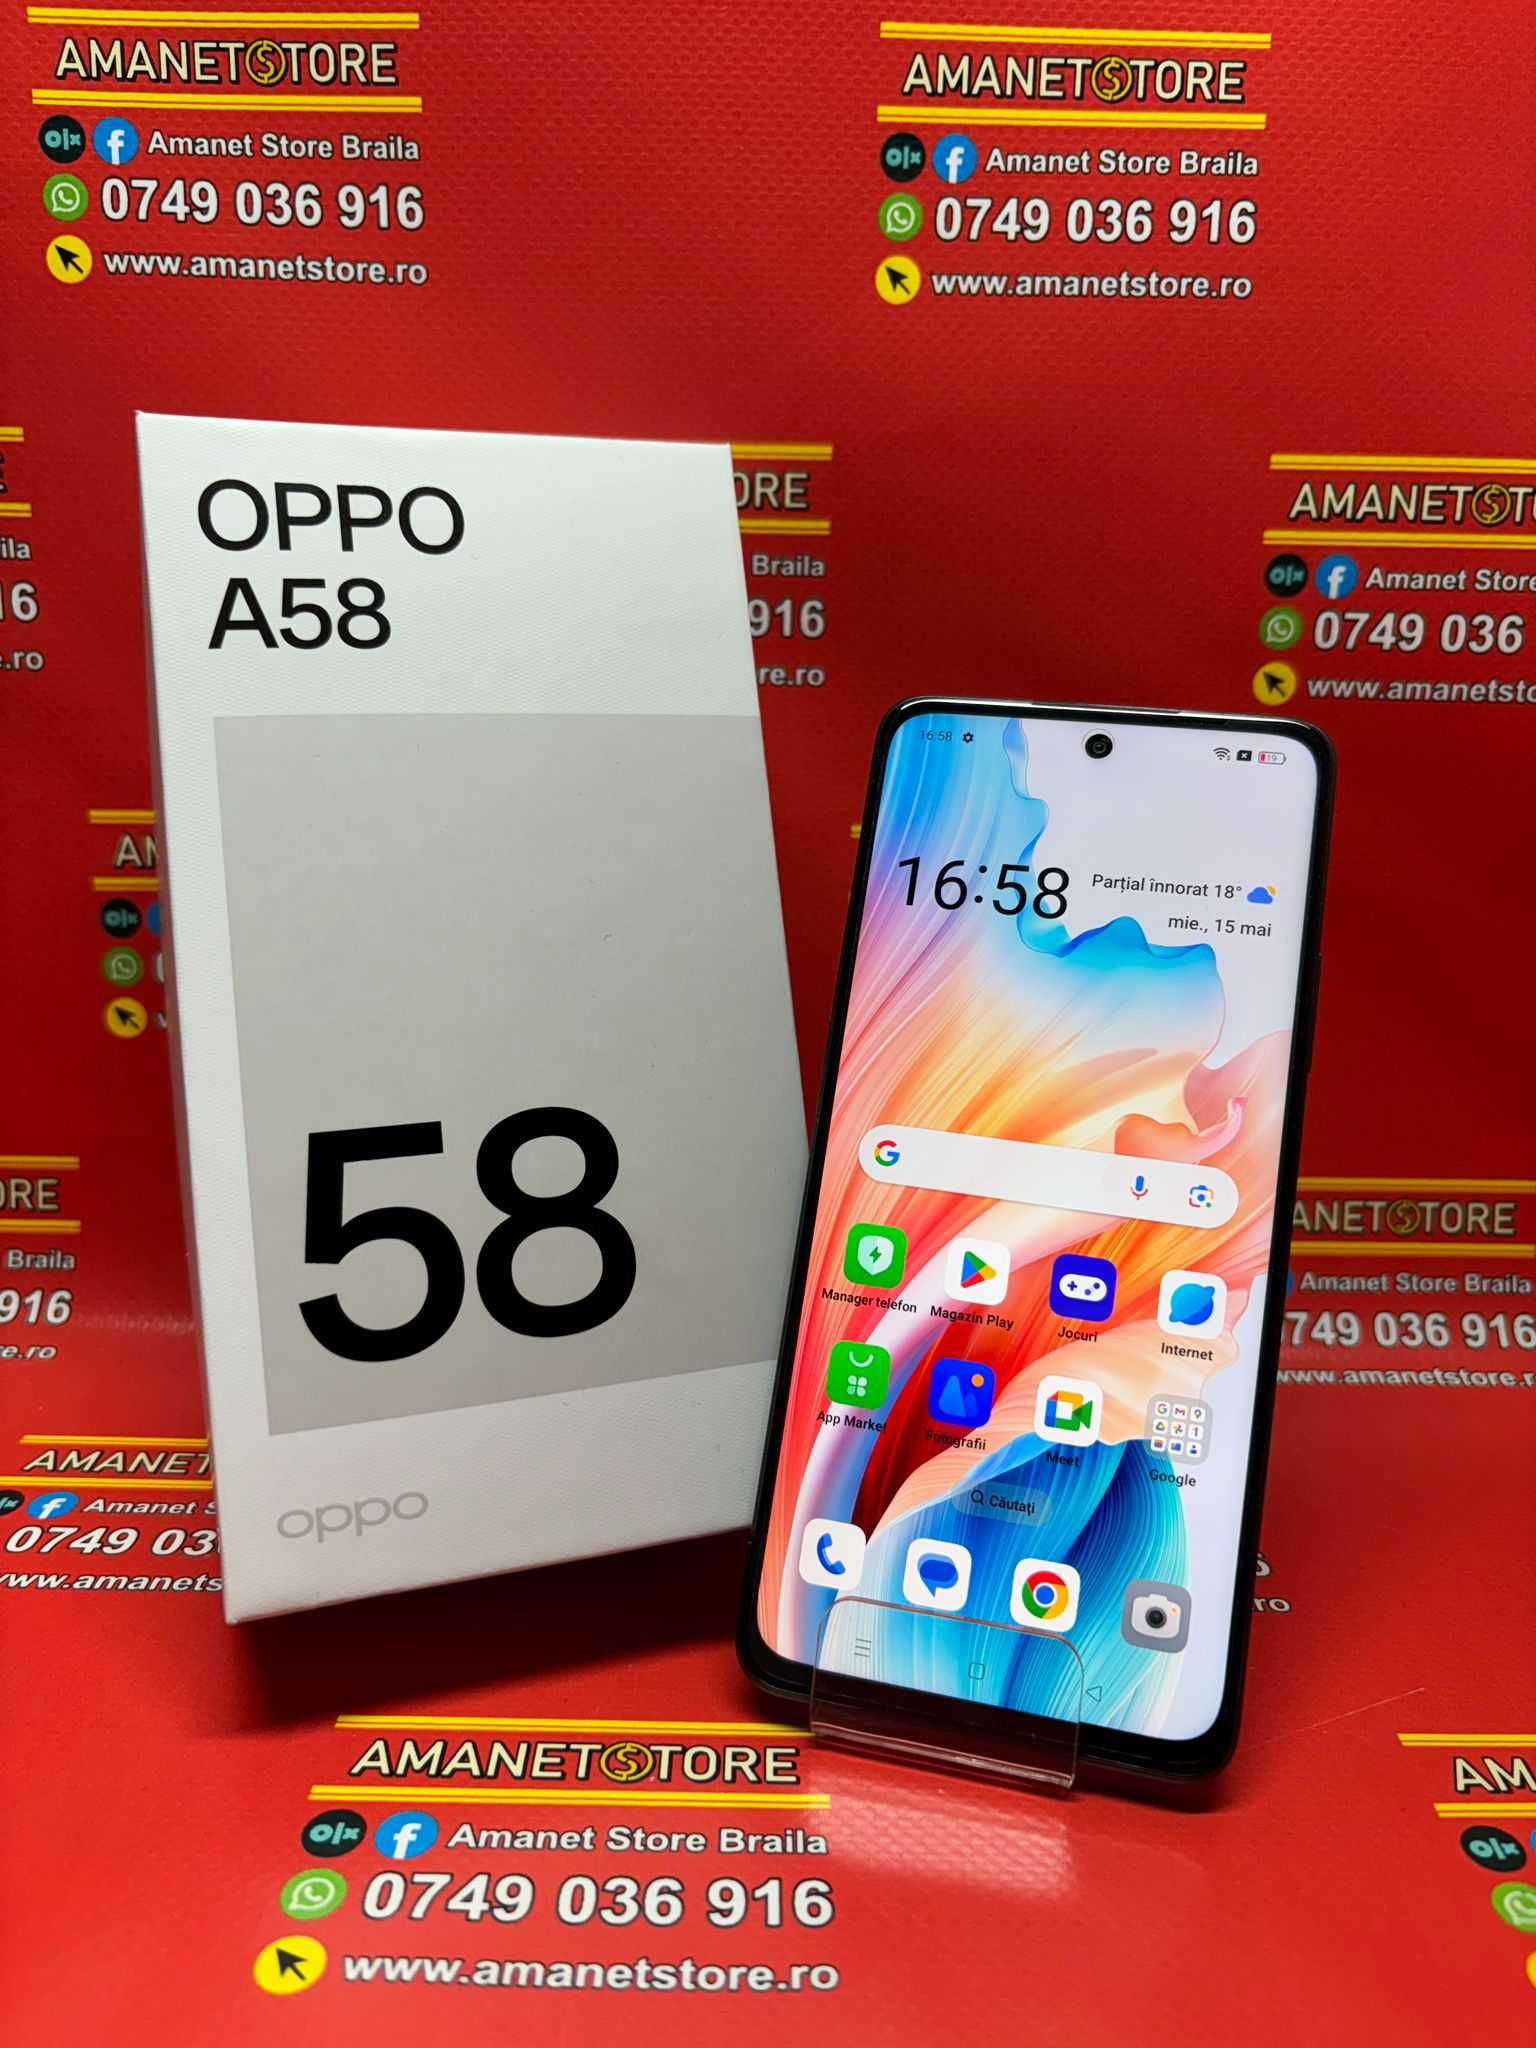 Oppo A58 Amanet Store Braila [10364]